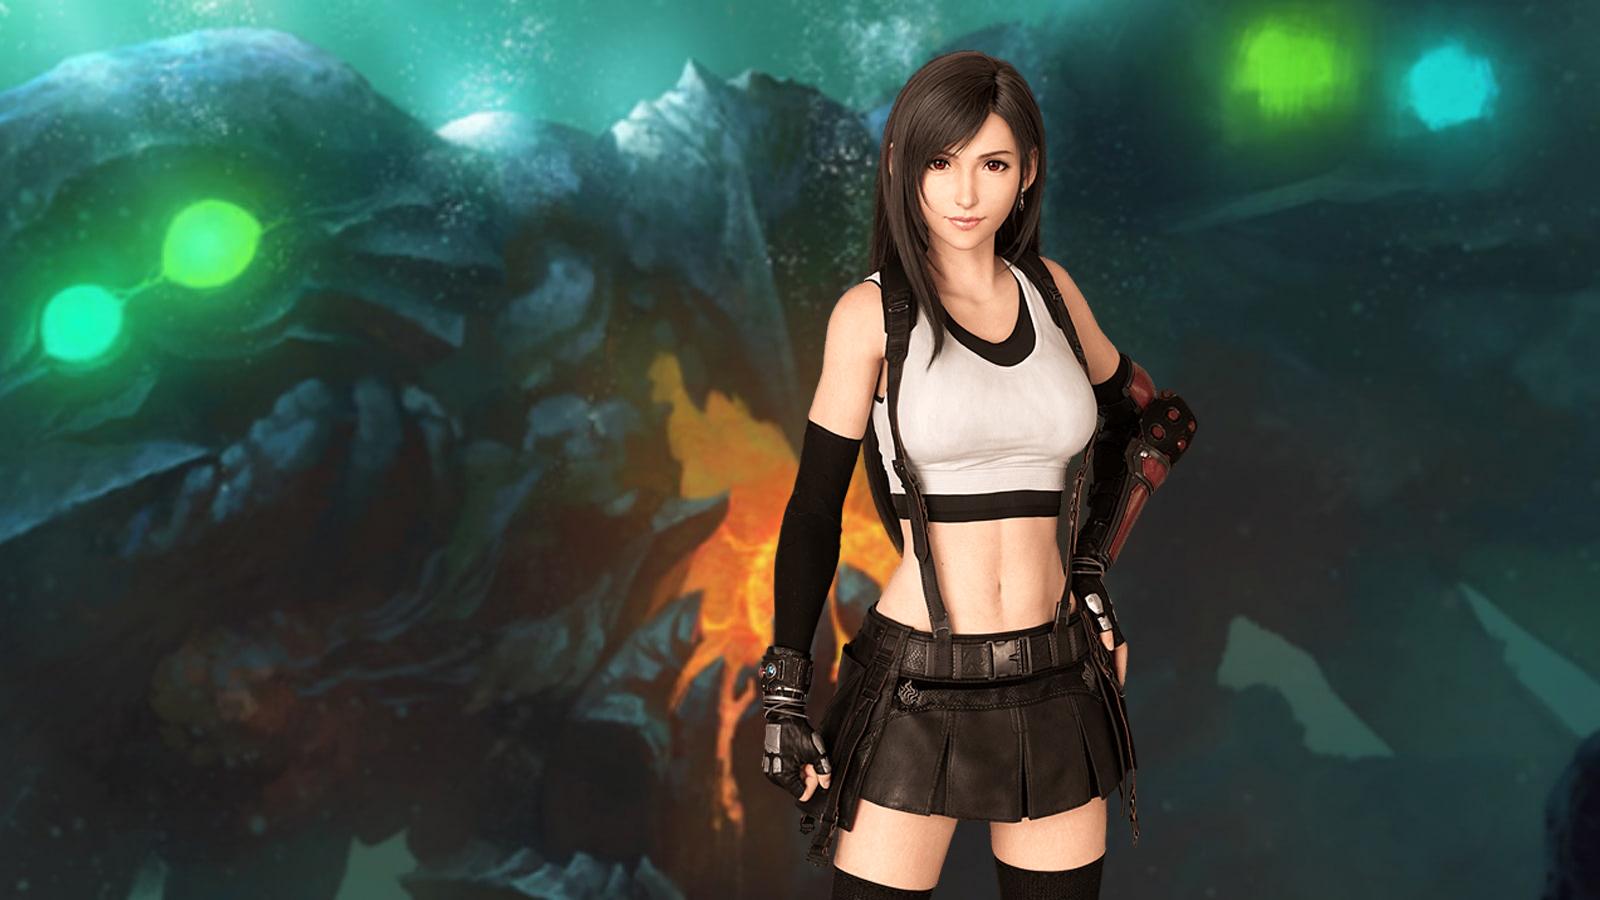 FF7 Remake Tifa in front of Emerald Weapon